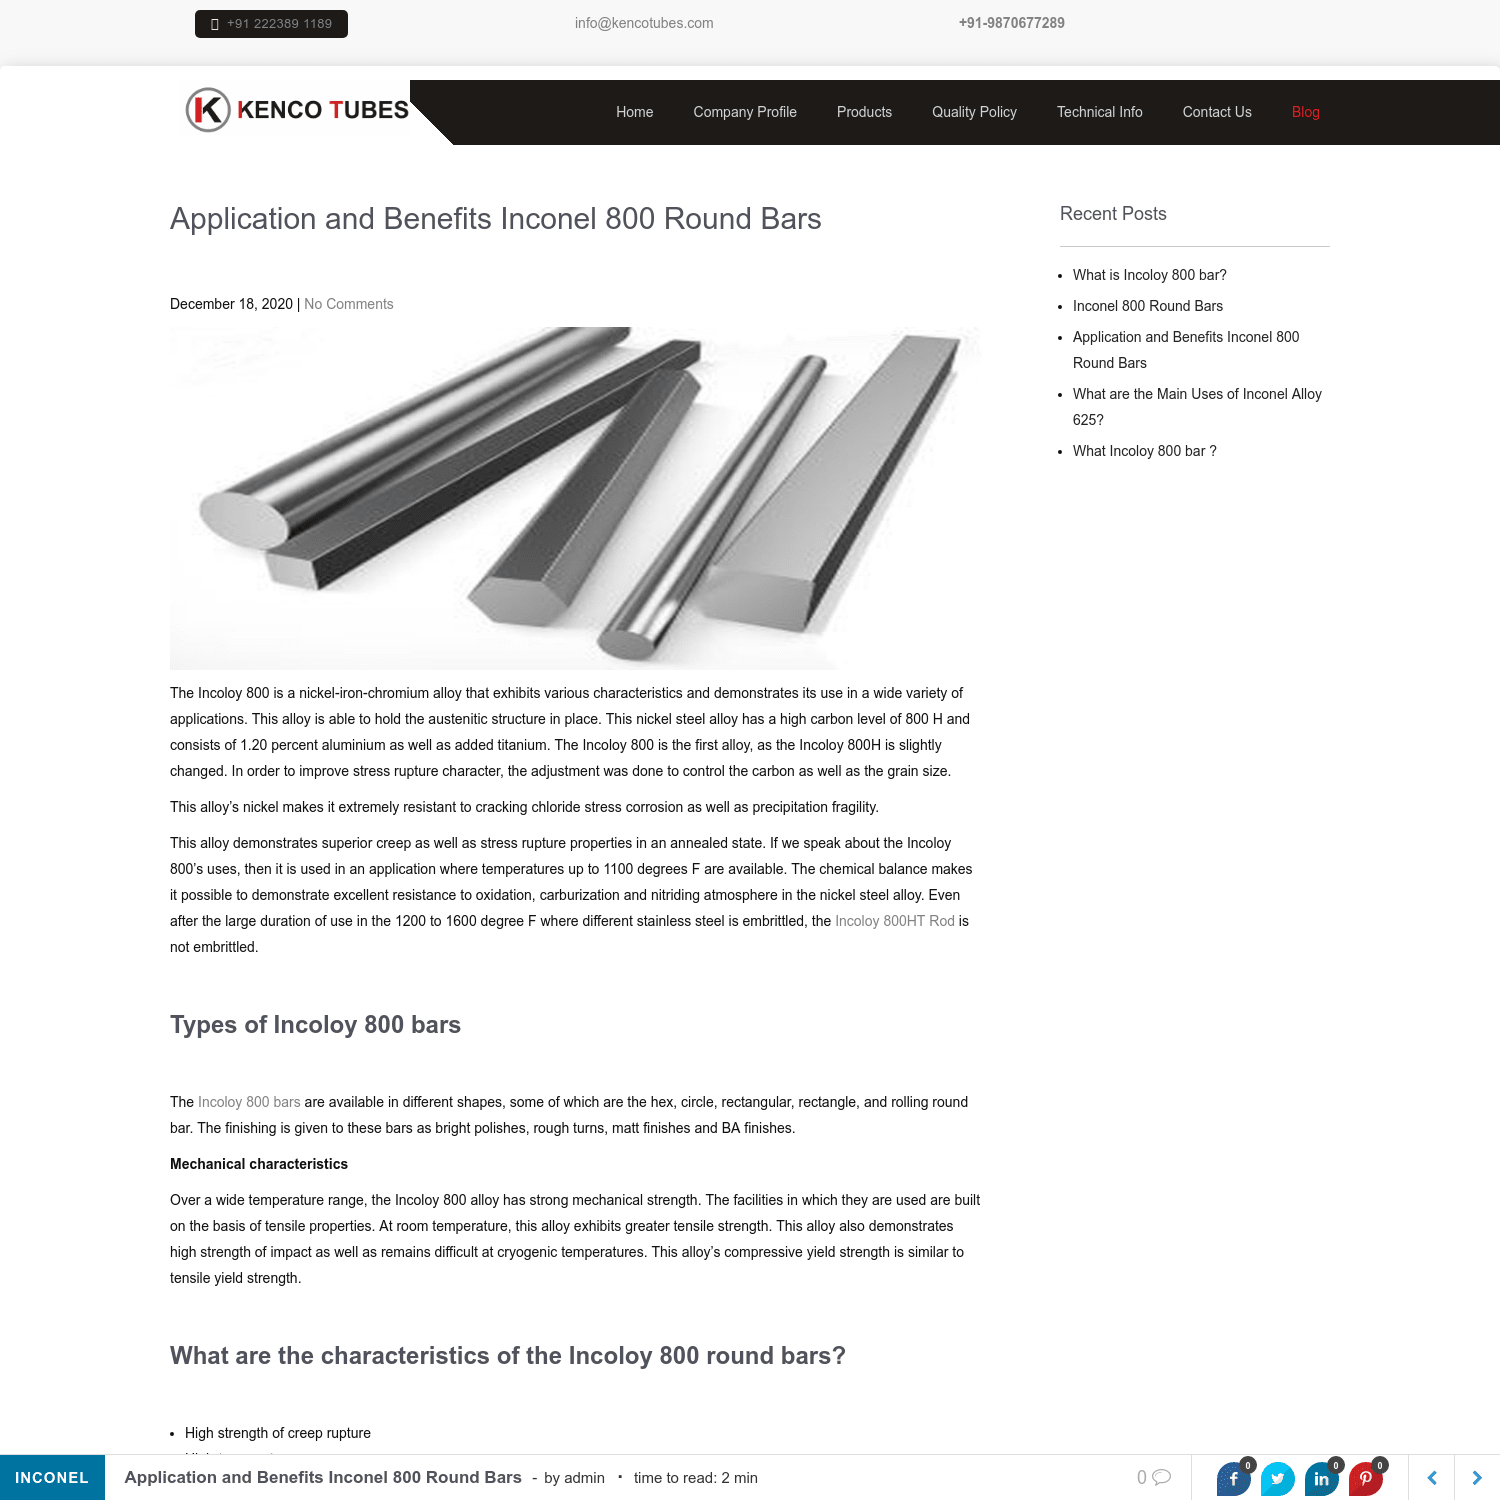 Application and Benefits Inconel 800 Round Bars